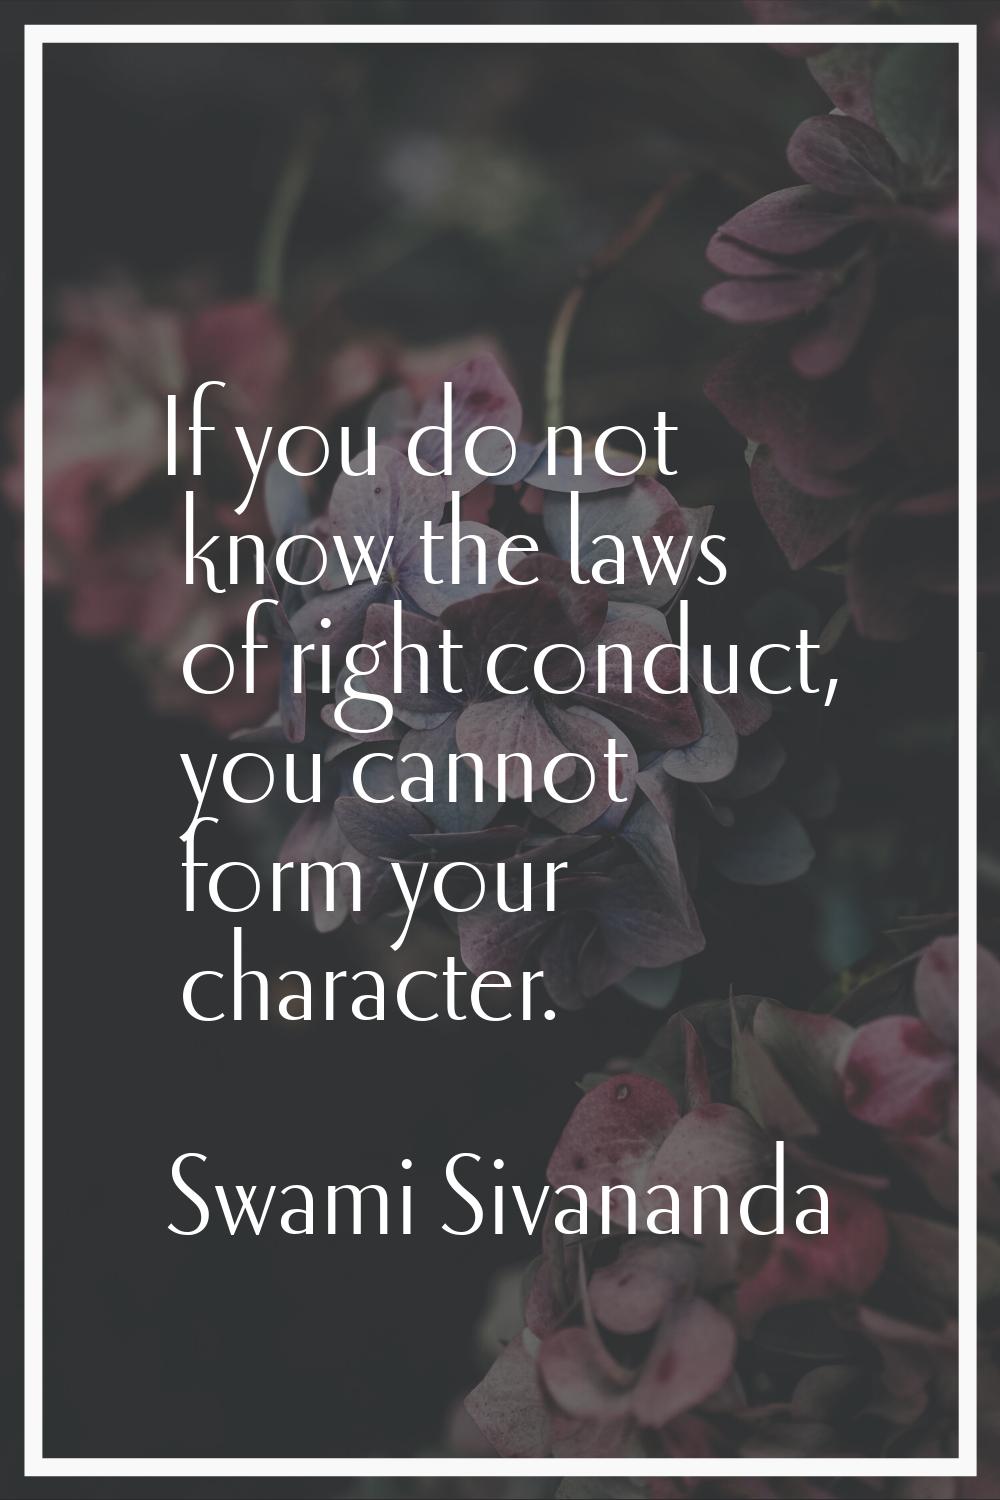 If you do not know the laws of right conduct, you cannot form your character.